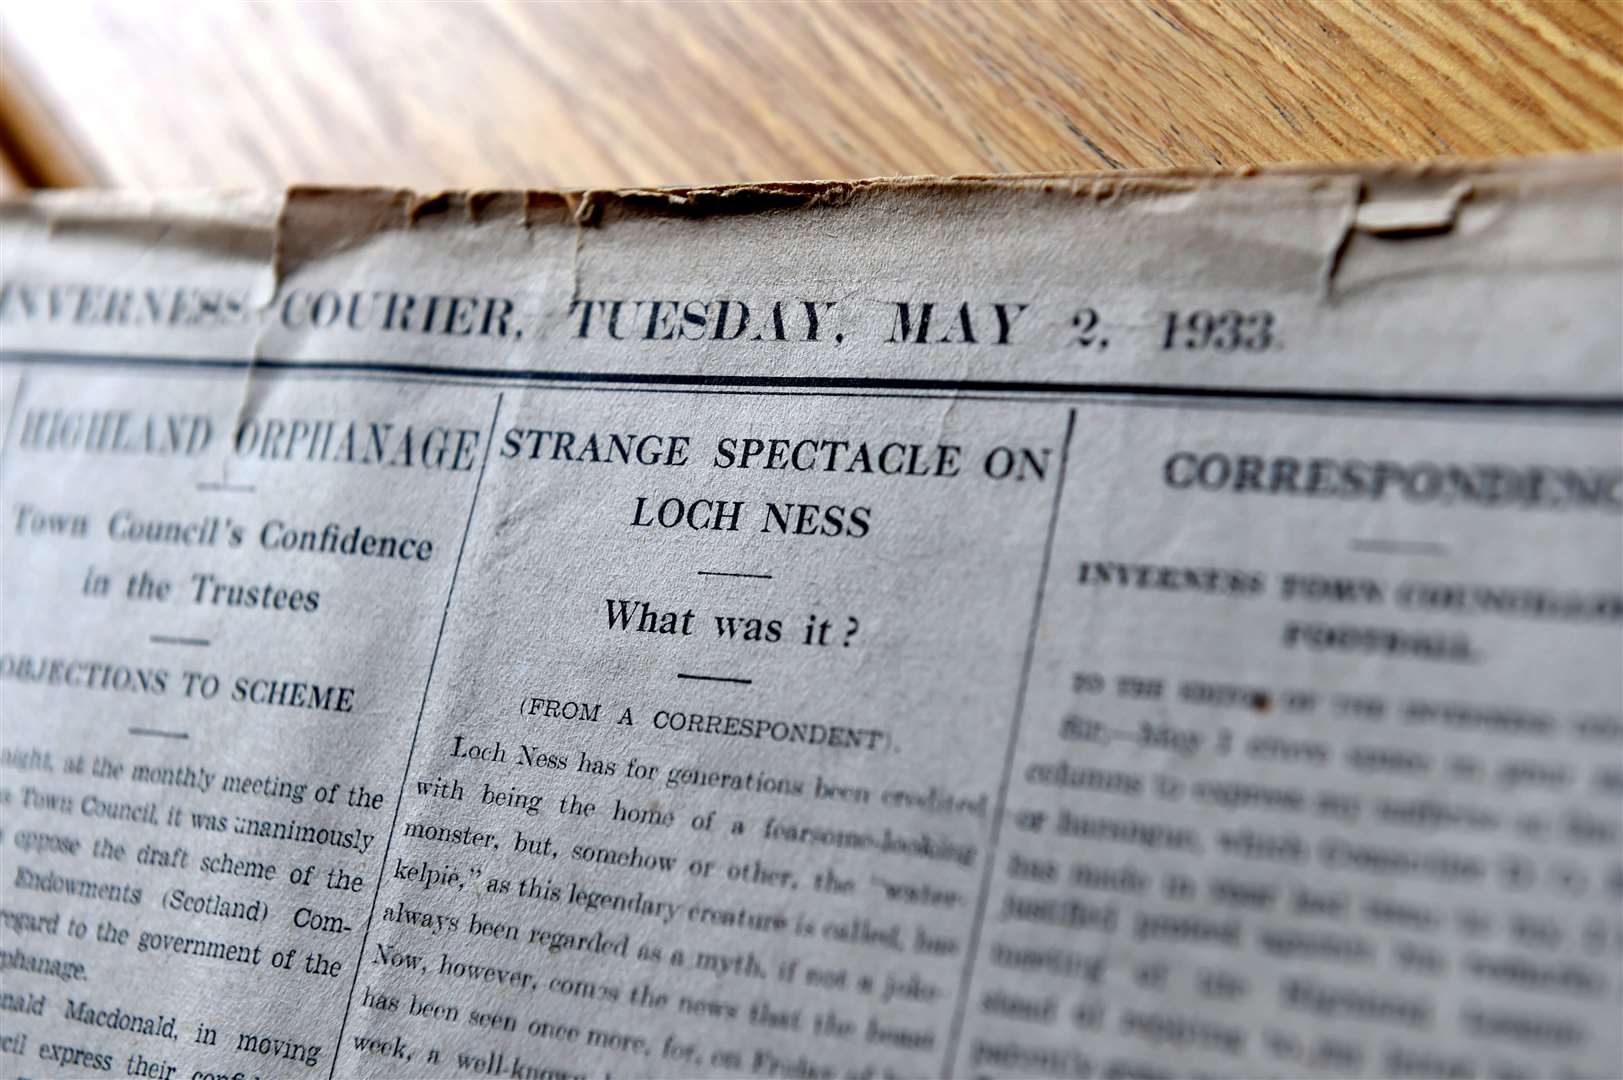 The first report of the Loch Ness "Monster" appeared in the Inverness Courier in May 1933.